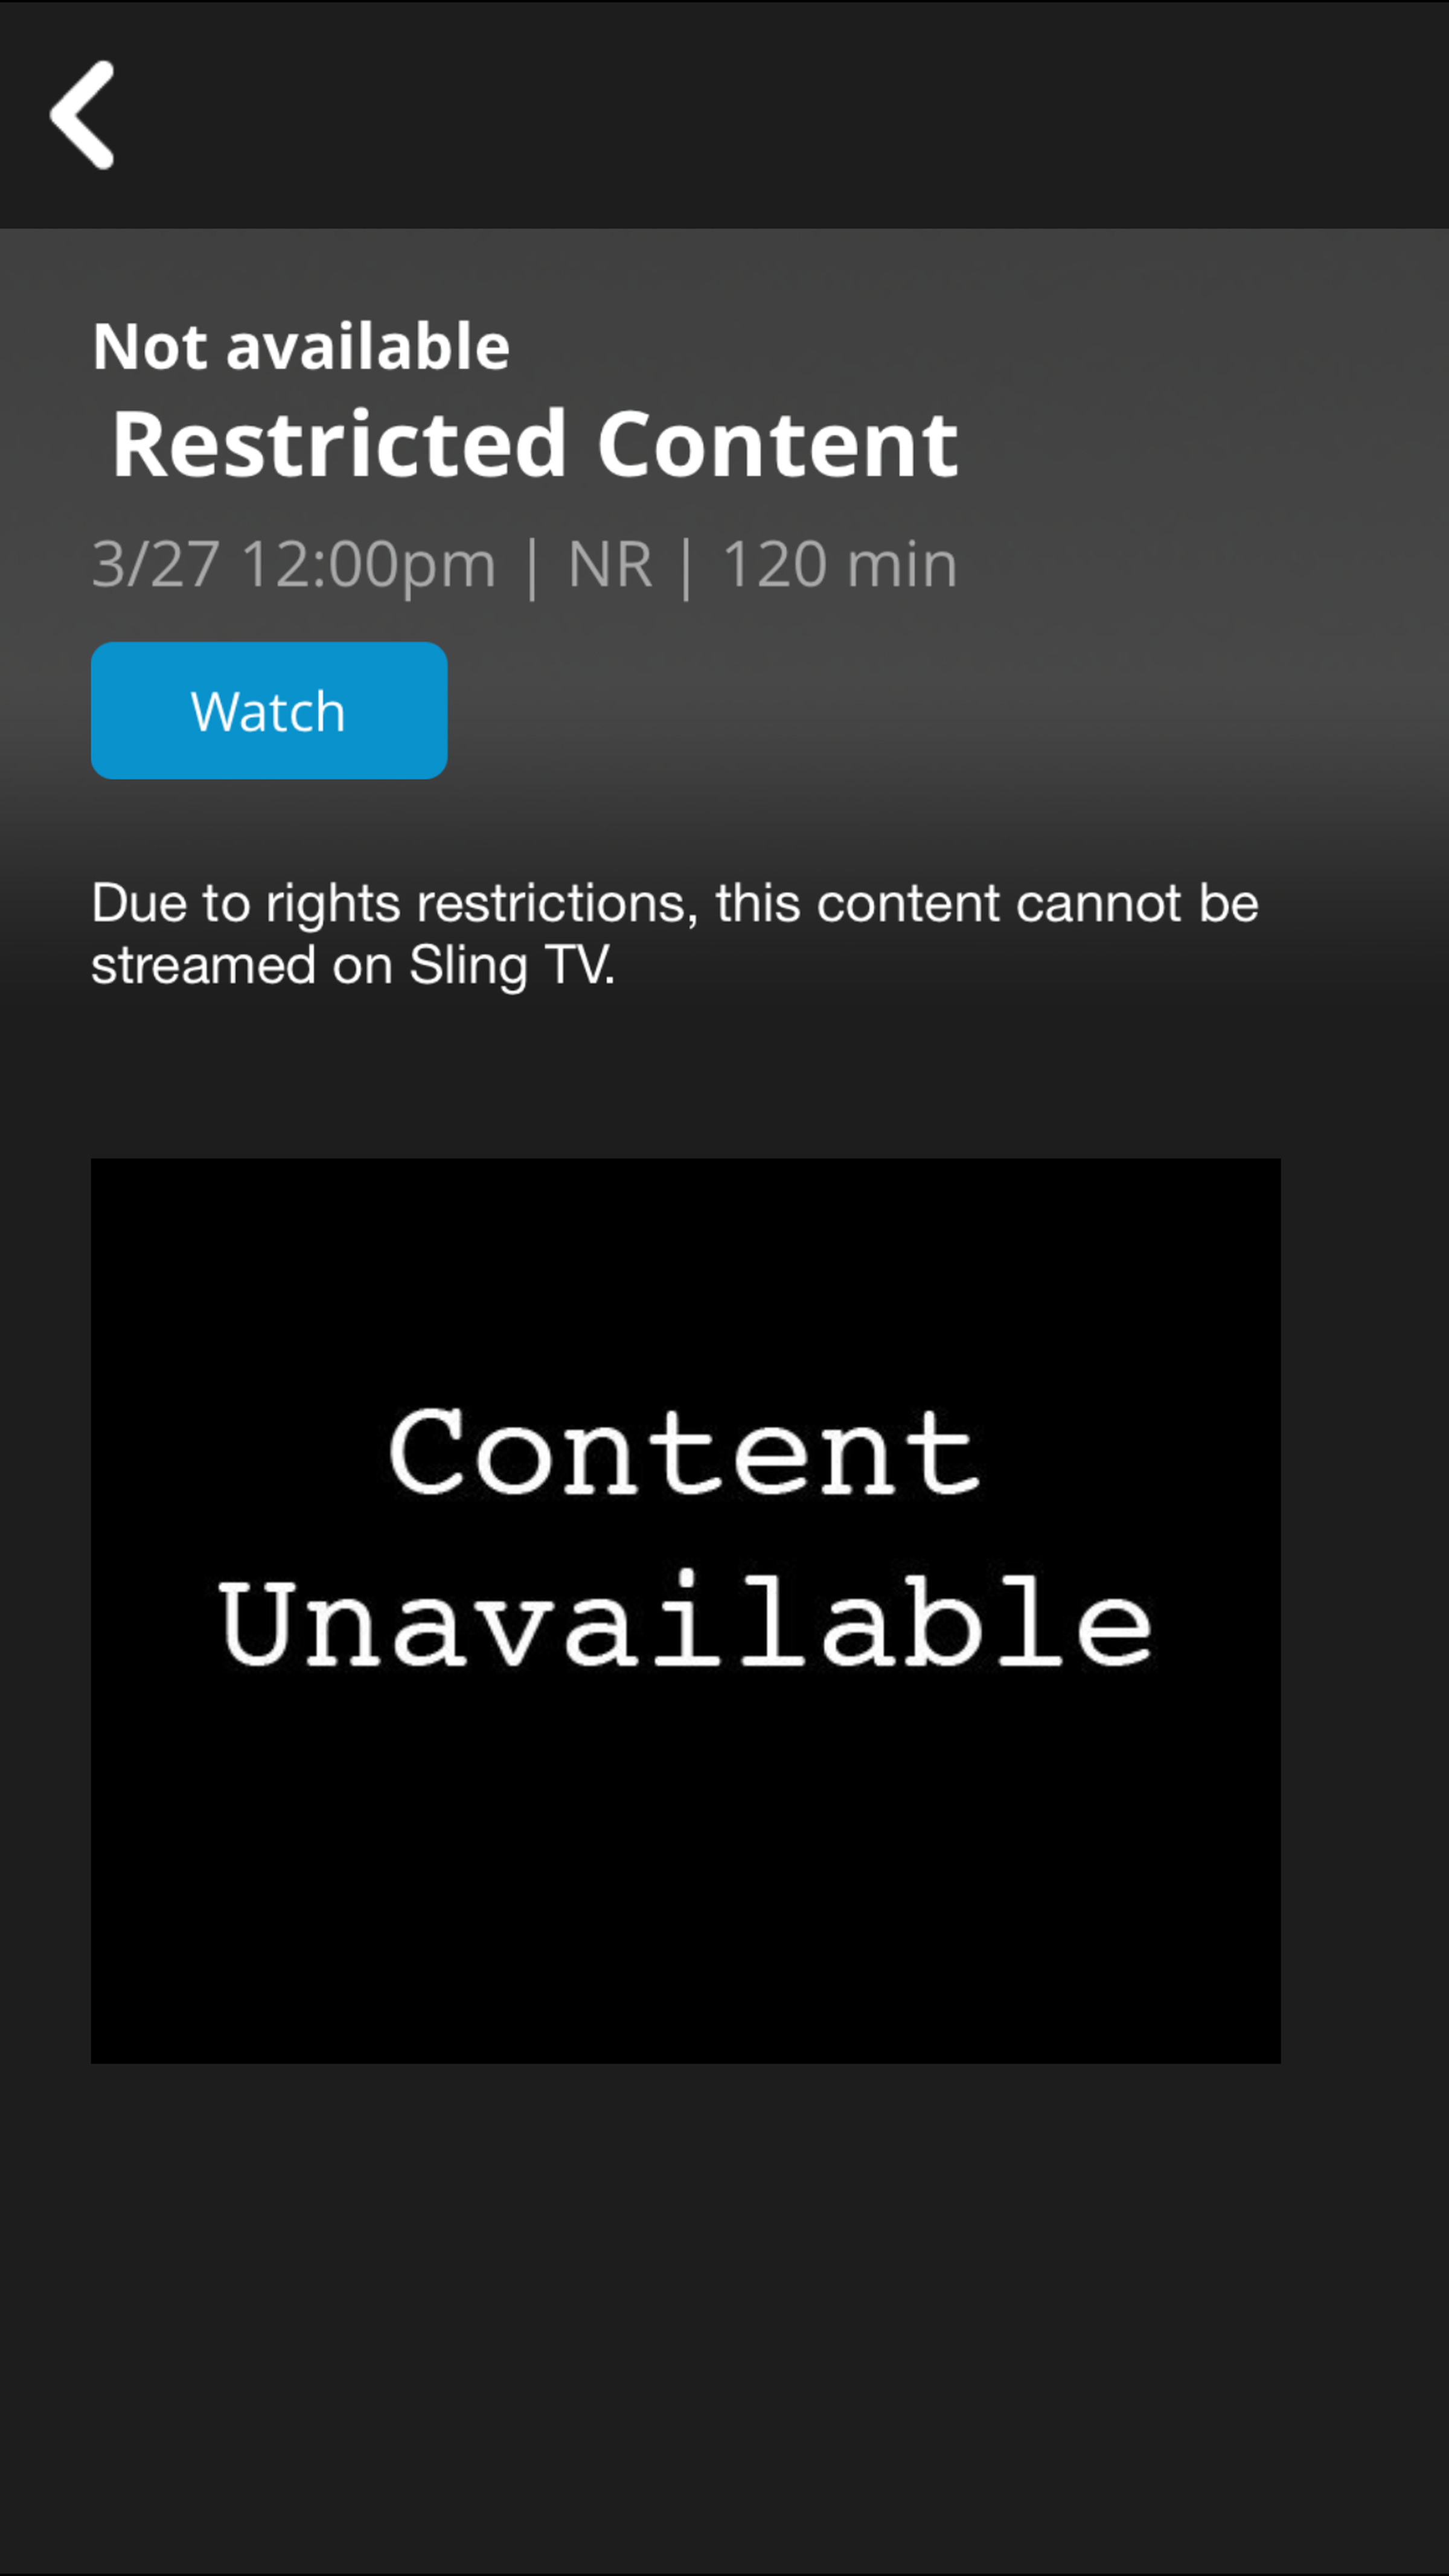 Sling TV content unavailable